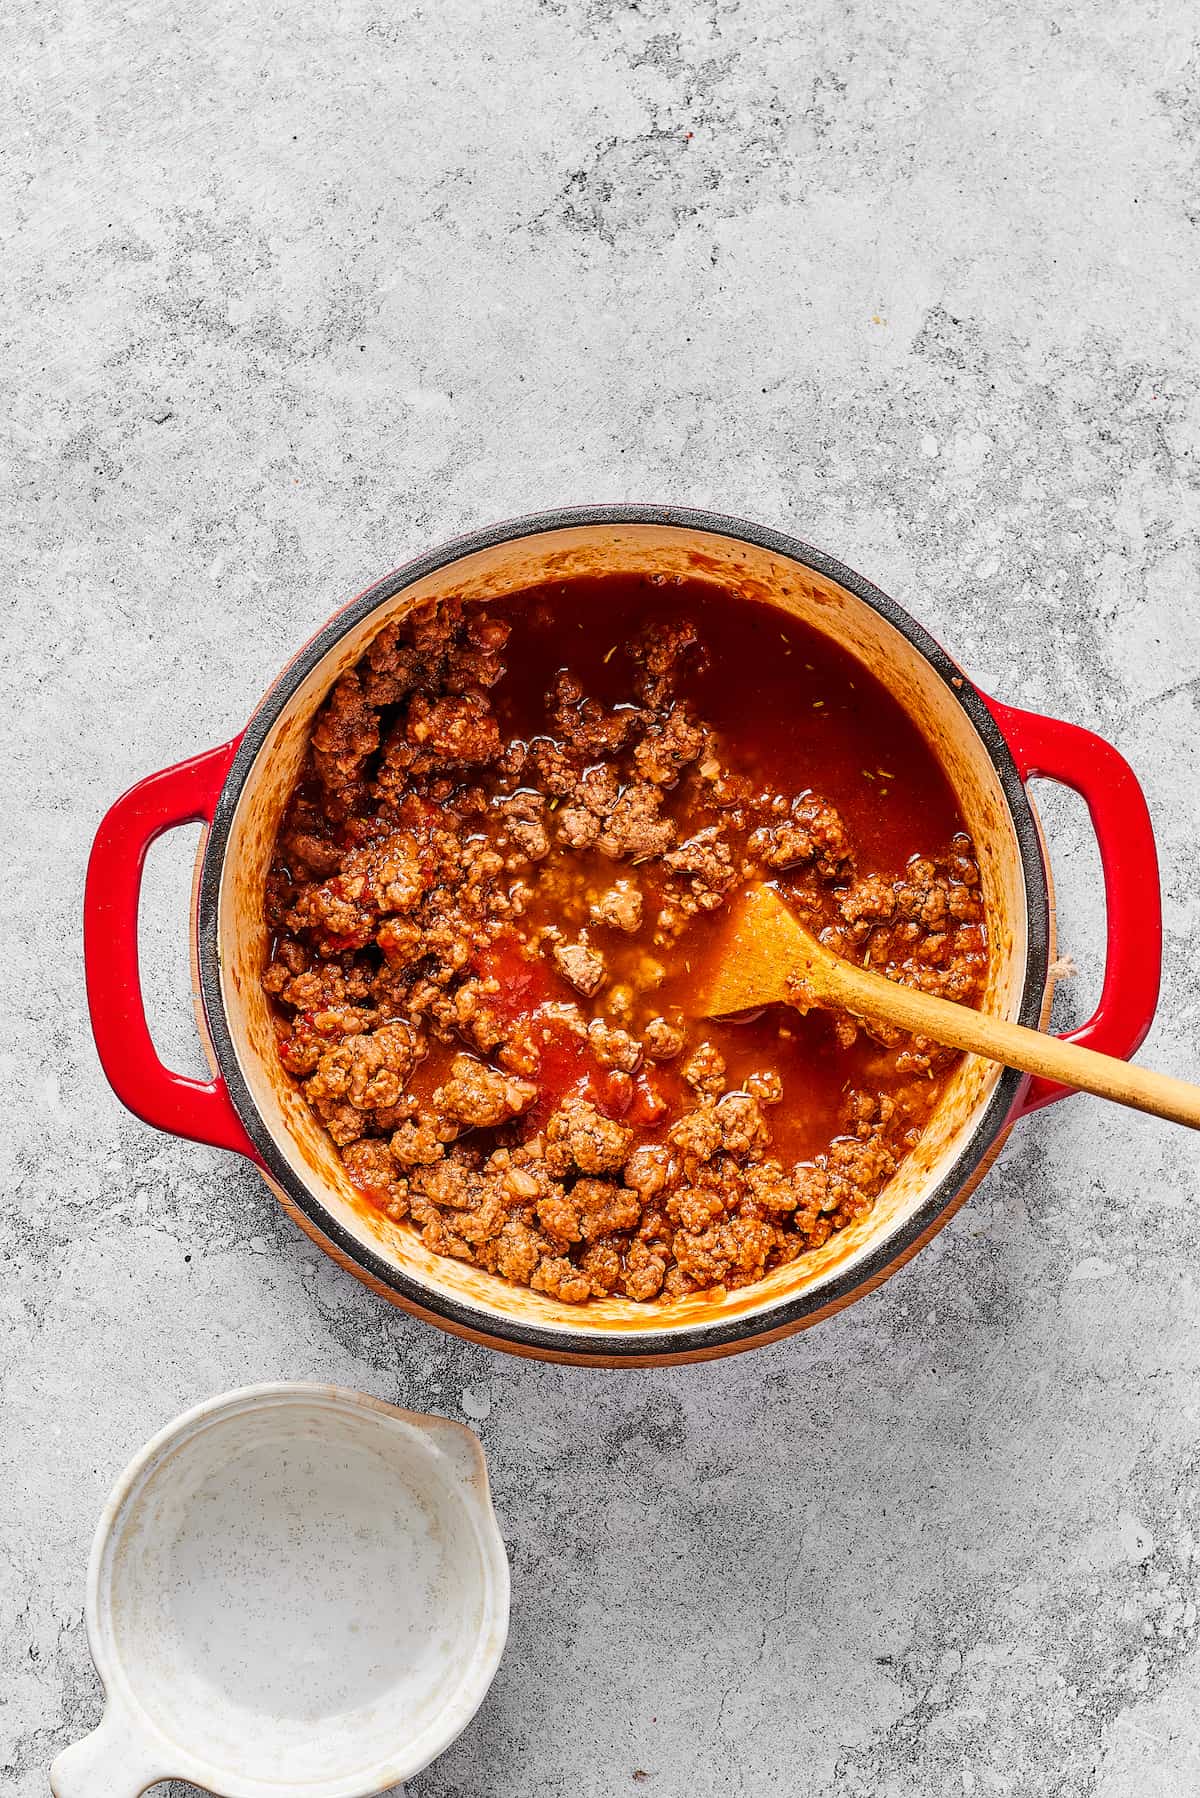 A wooden spoon stirring tomato sauce into ground beef